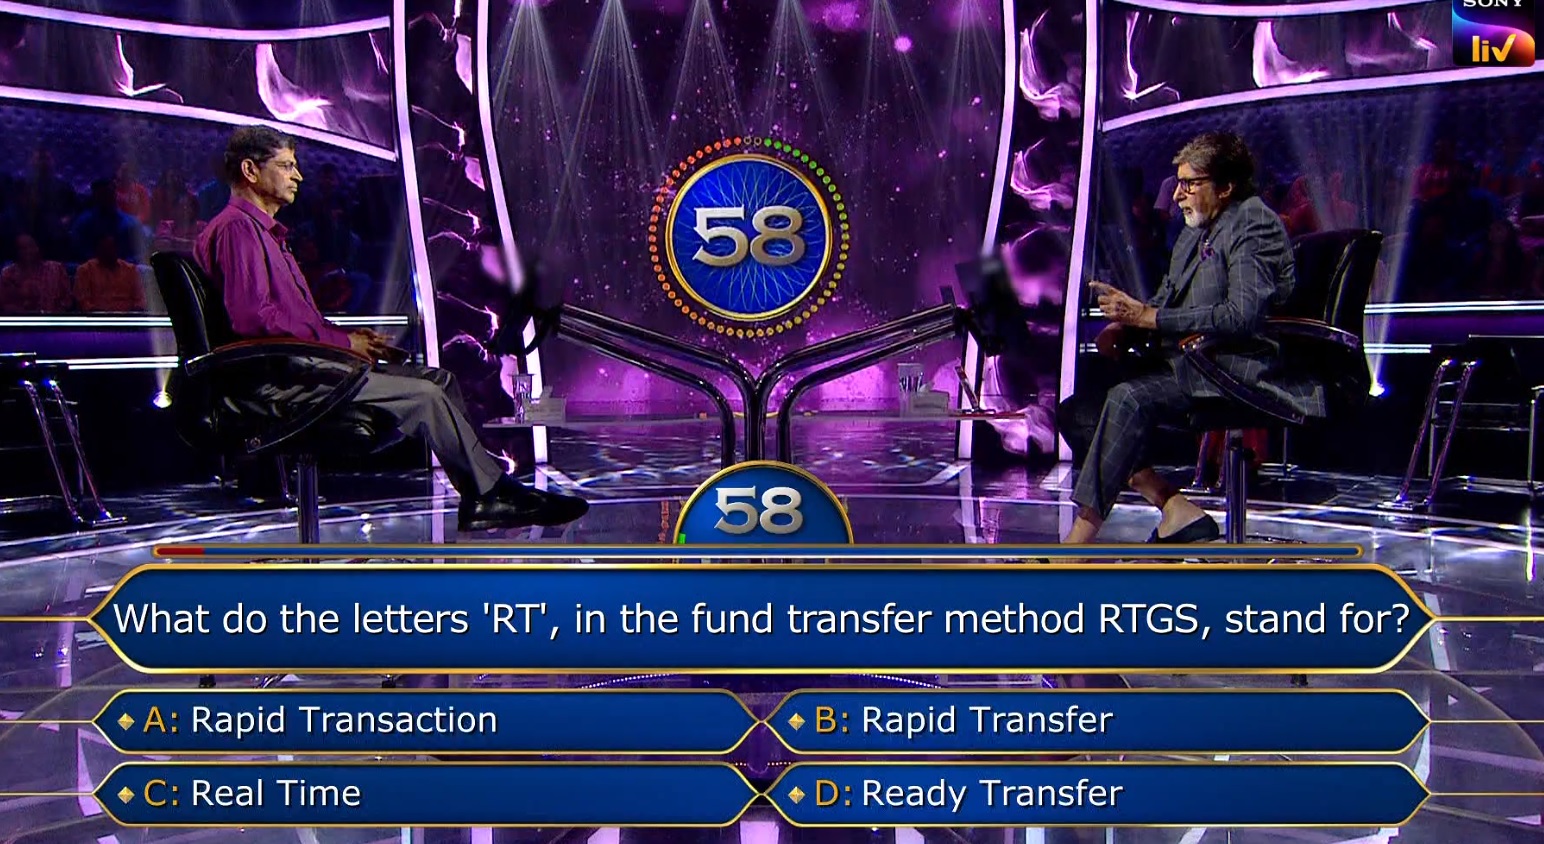 Ques : What do the letters ‘RT’ in the fund transfer method RTGS, stand for?